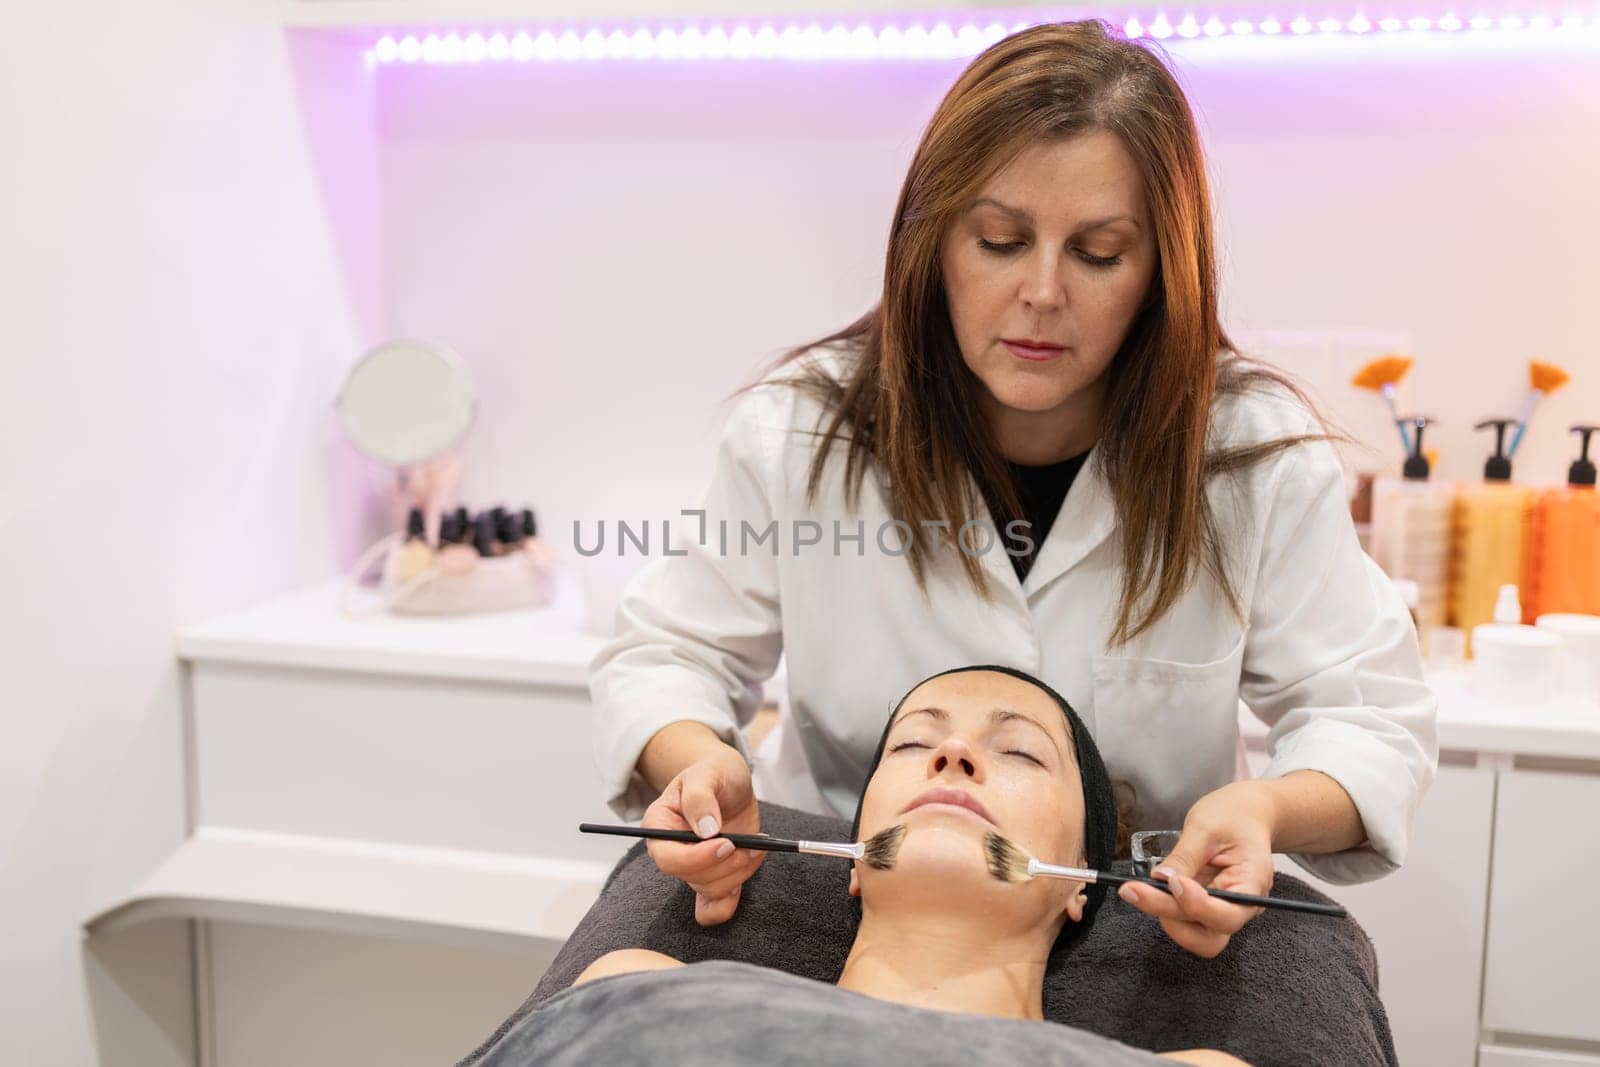 Beautician applying facial cleansing oil, with brush on woman lying face up with eyes closed during cosmetology session in beauty salon in background with cosmetics on counter